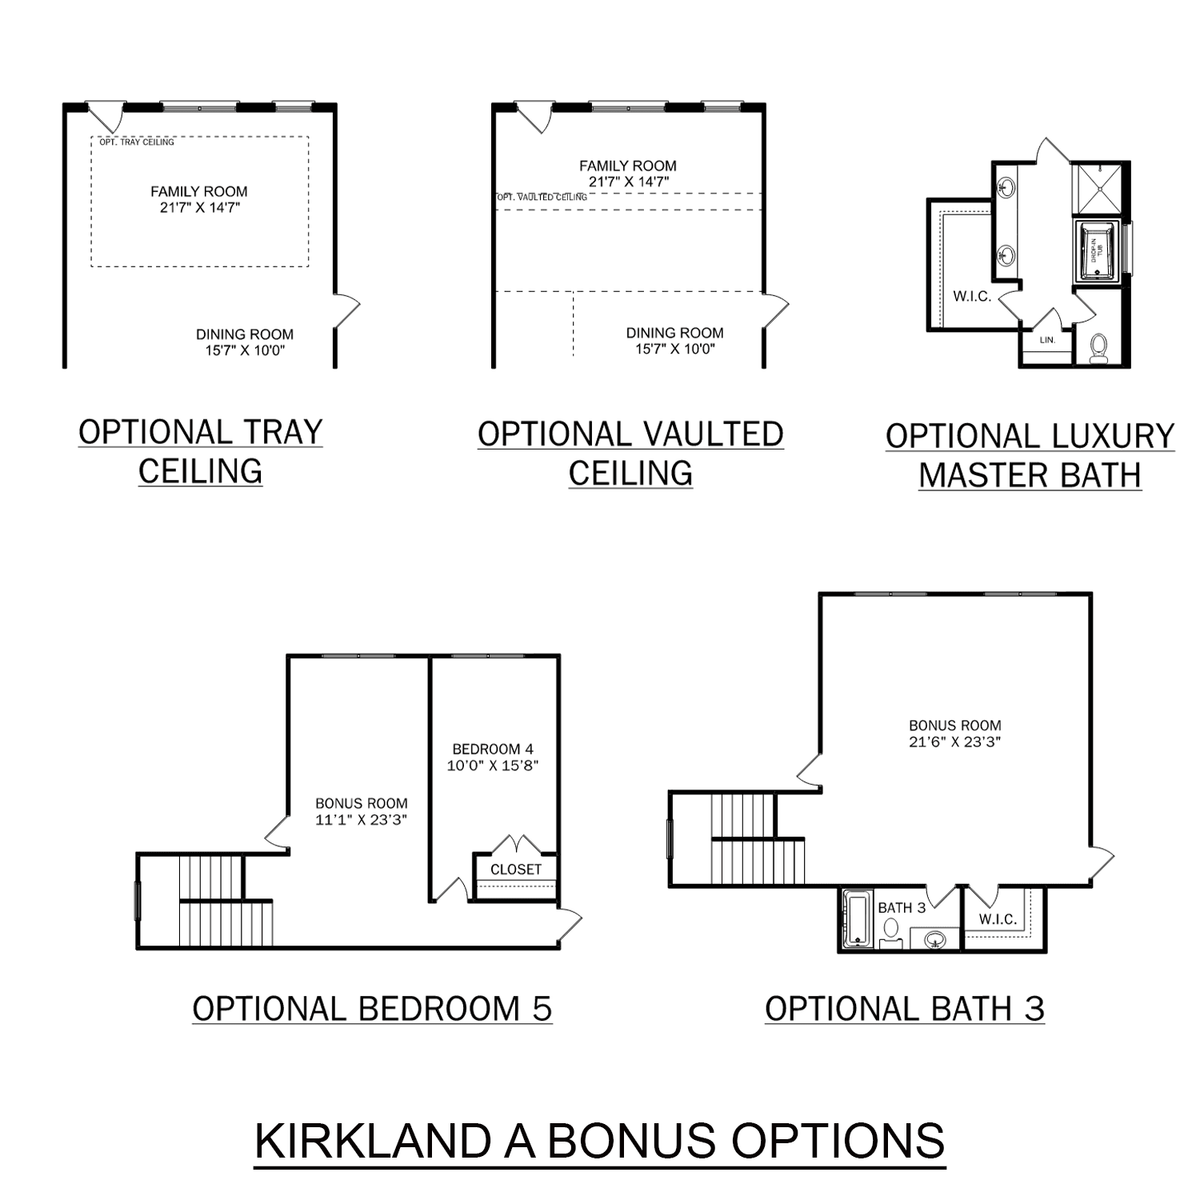 3 - The Kirkland with Bonus buildable floor plan layout in Davidson Homes' Kendall Downs community.